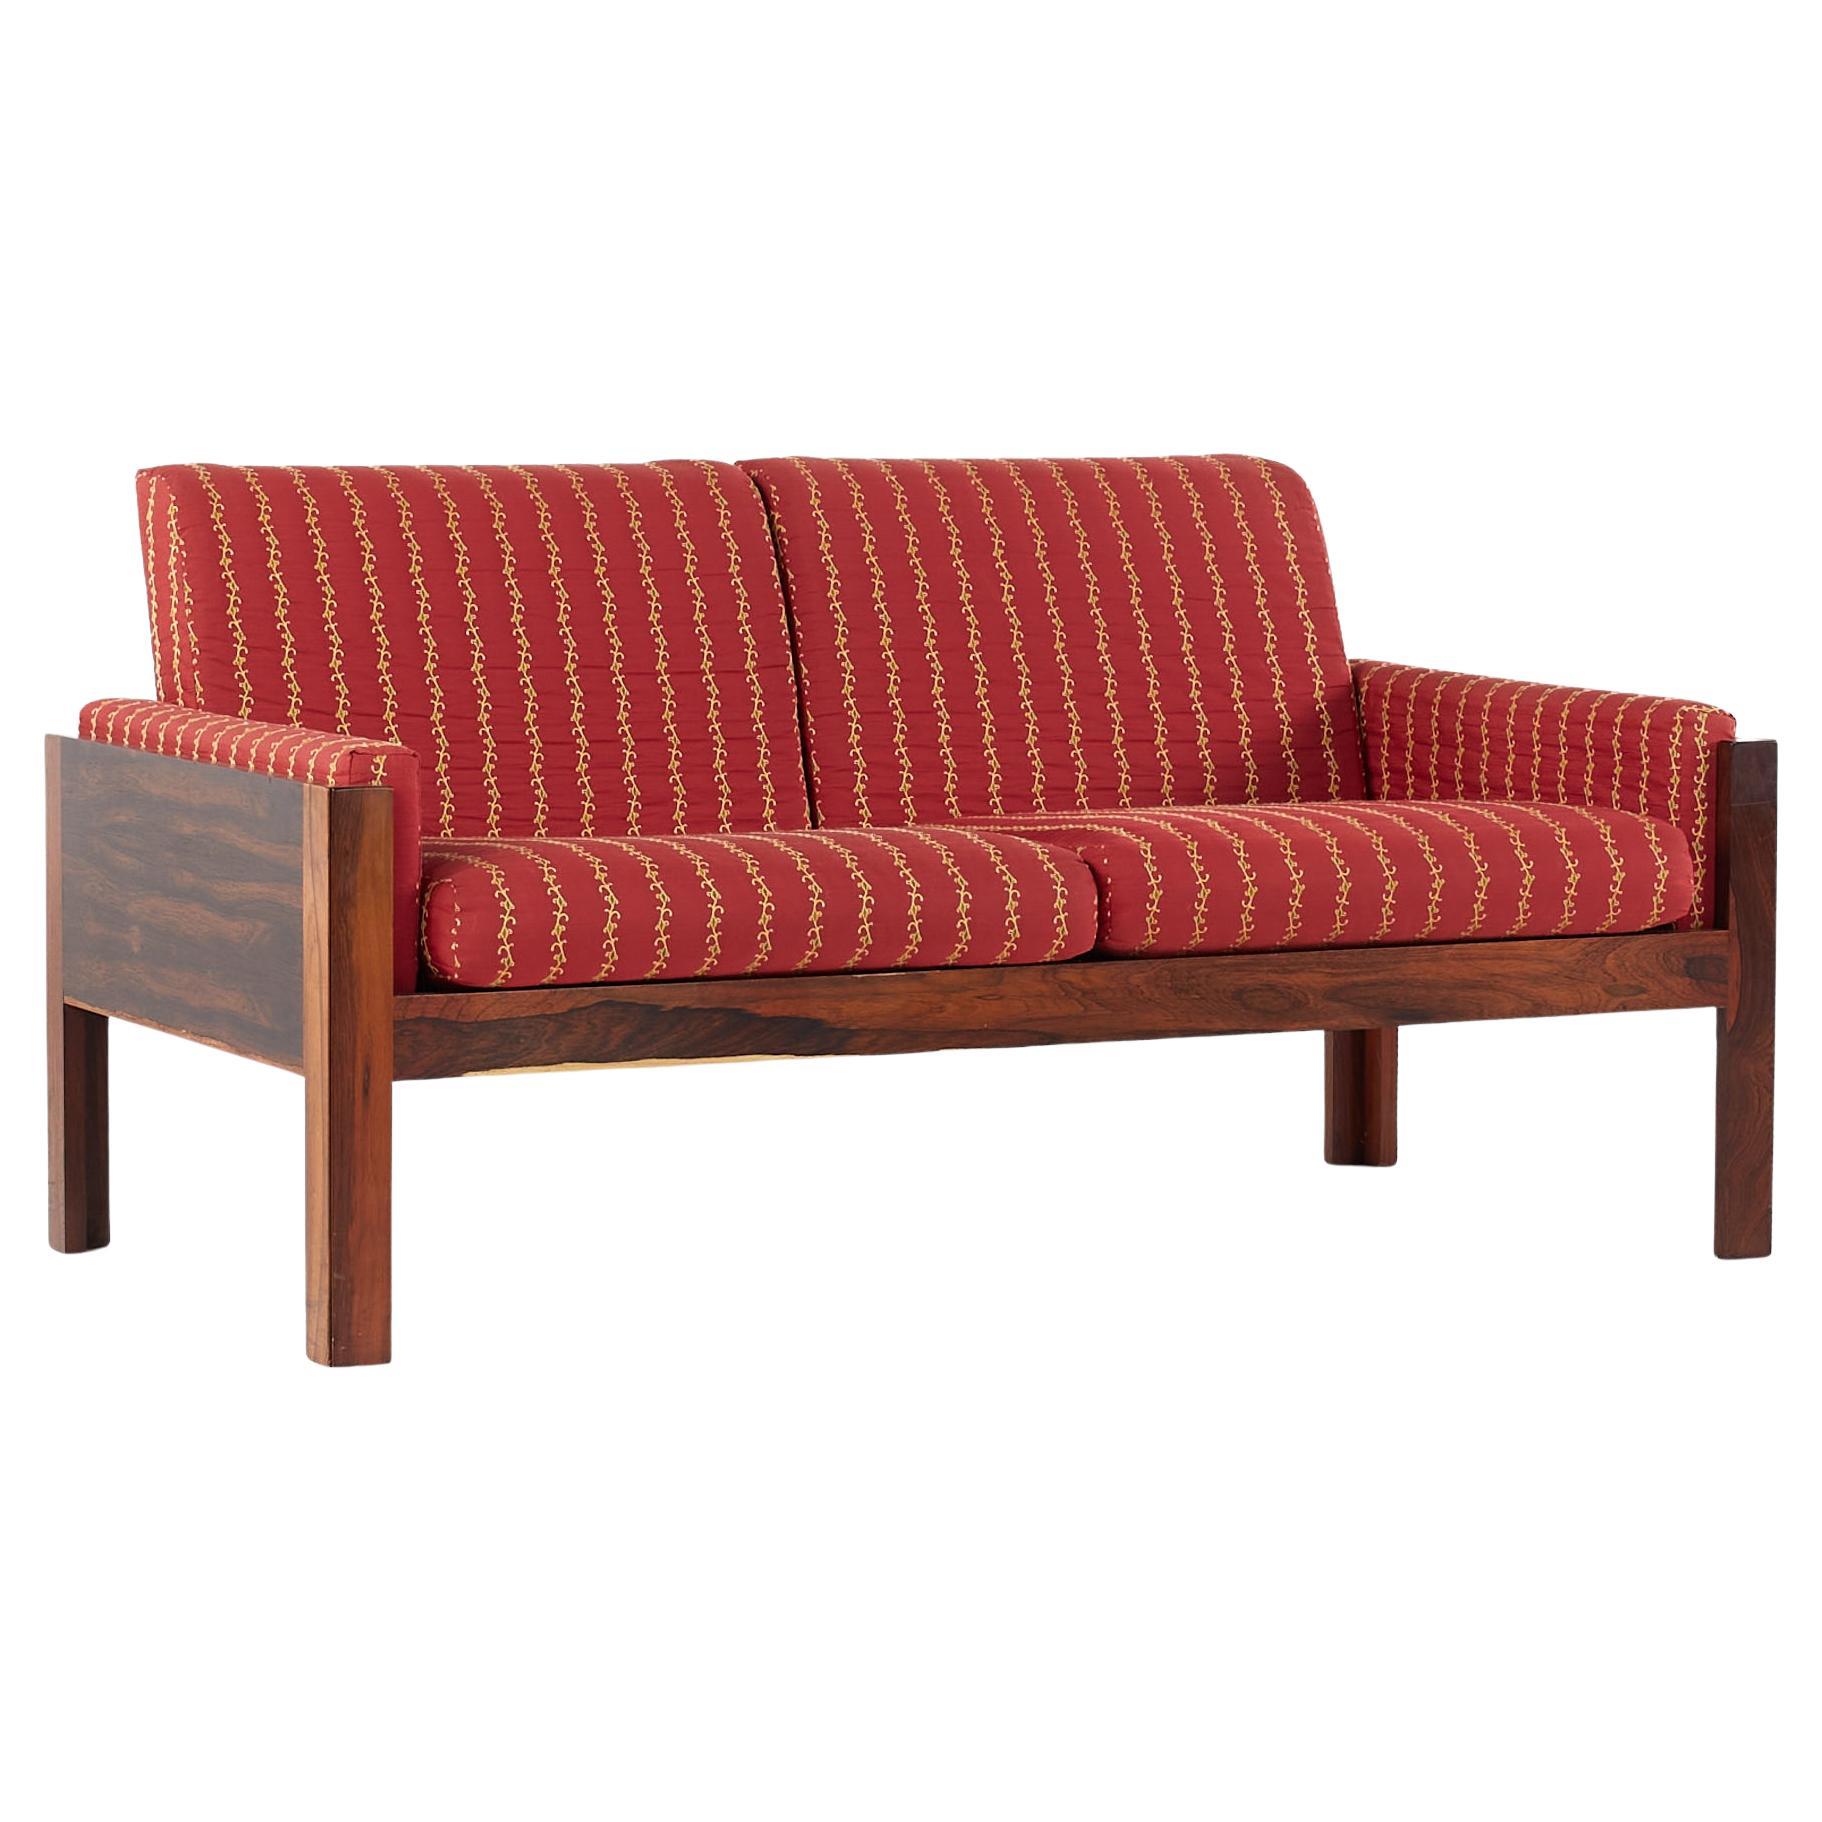 Arne Norell Style Mid Century Danish Rosewood Settee Loveseat Sofa For Sale